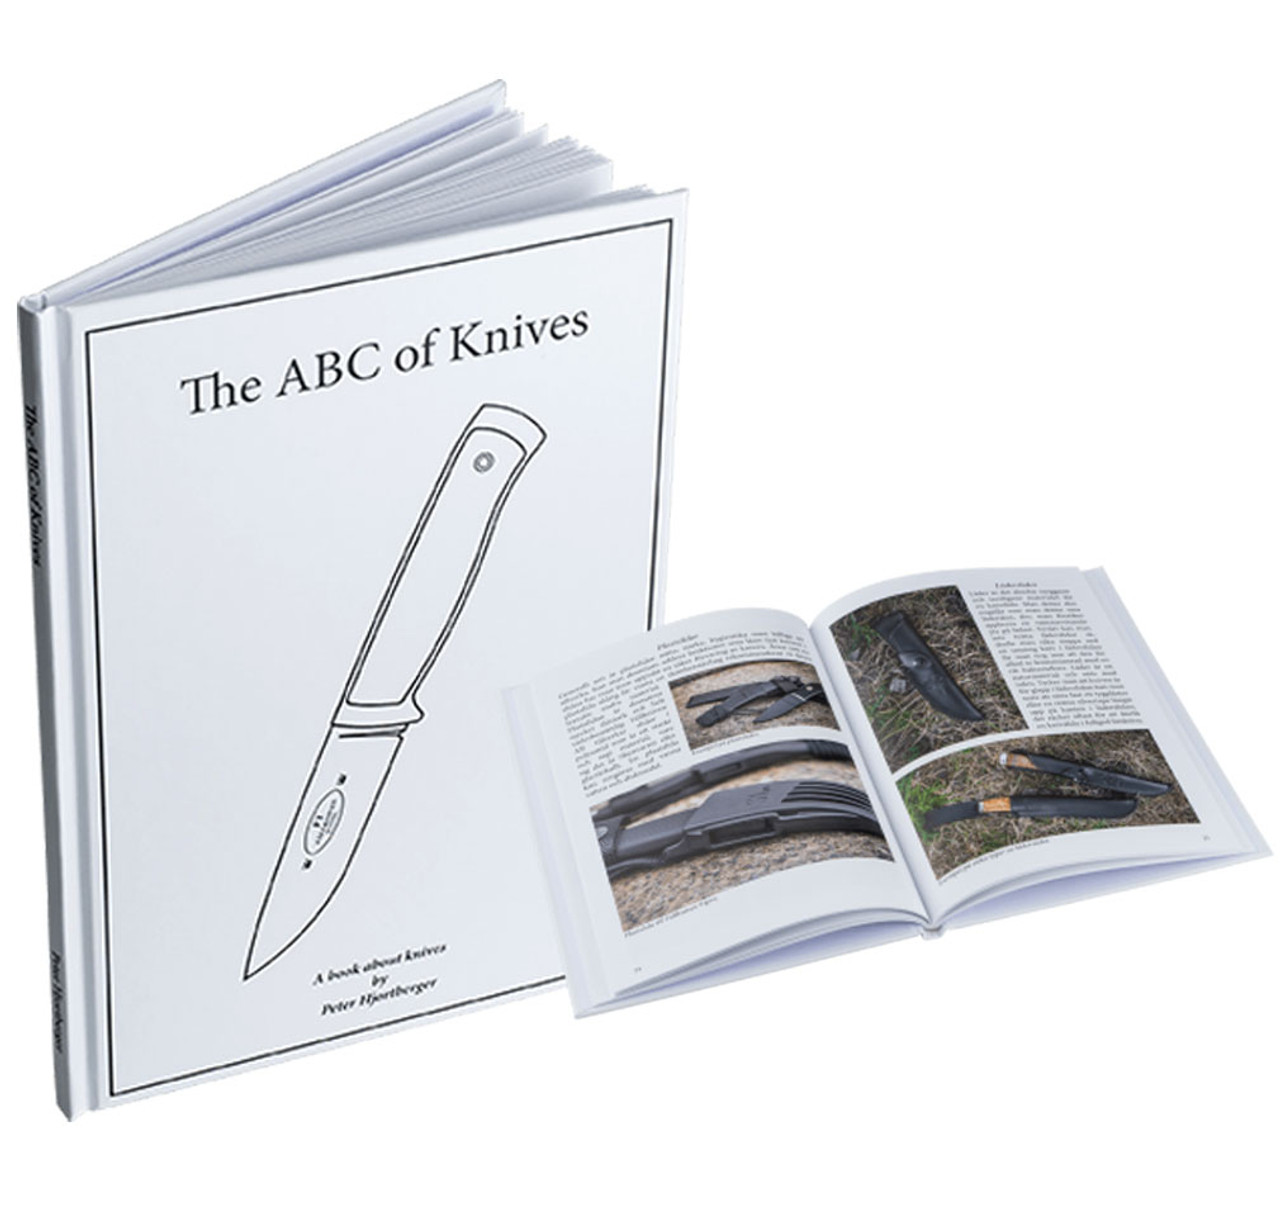 Fallkniven The ABC of Knives by Peter Hjortberger, FNBK